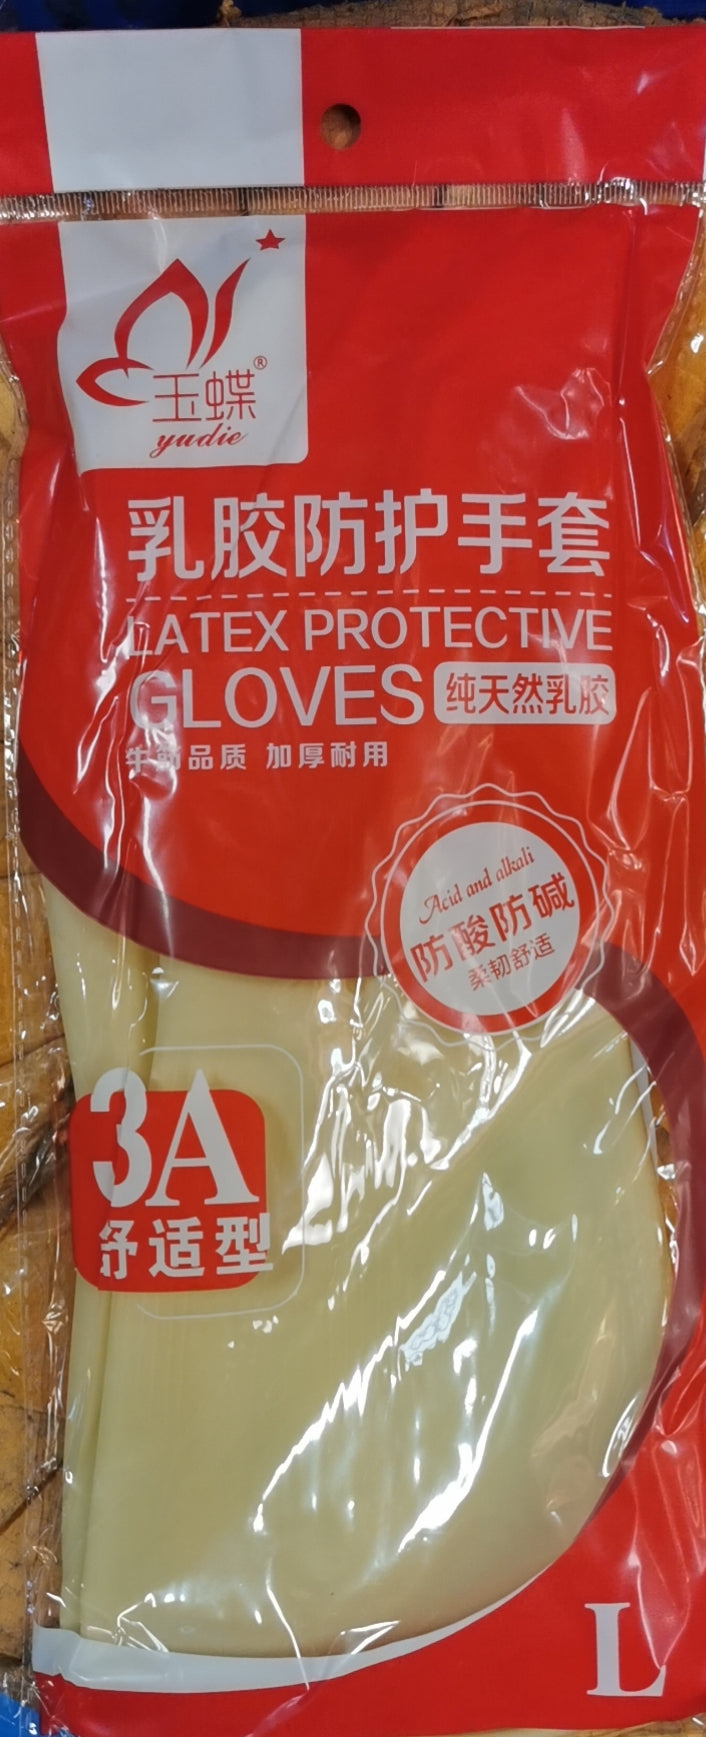 LATEX PROTECTIVE GLOVE FOR KITCHEN $9.50/10PAIR